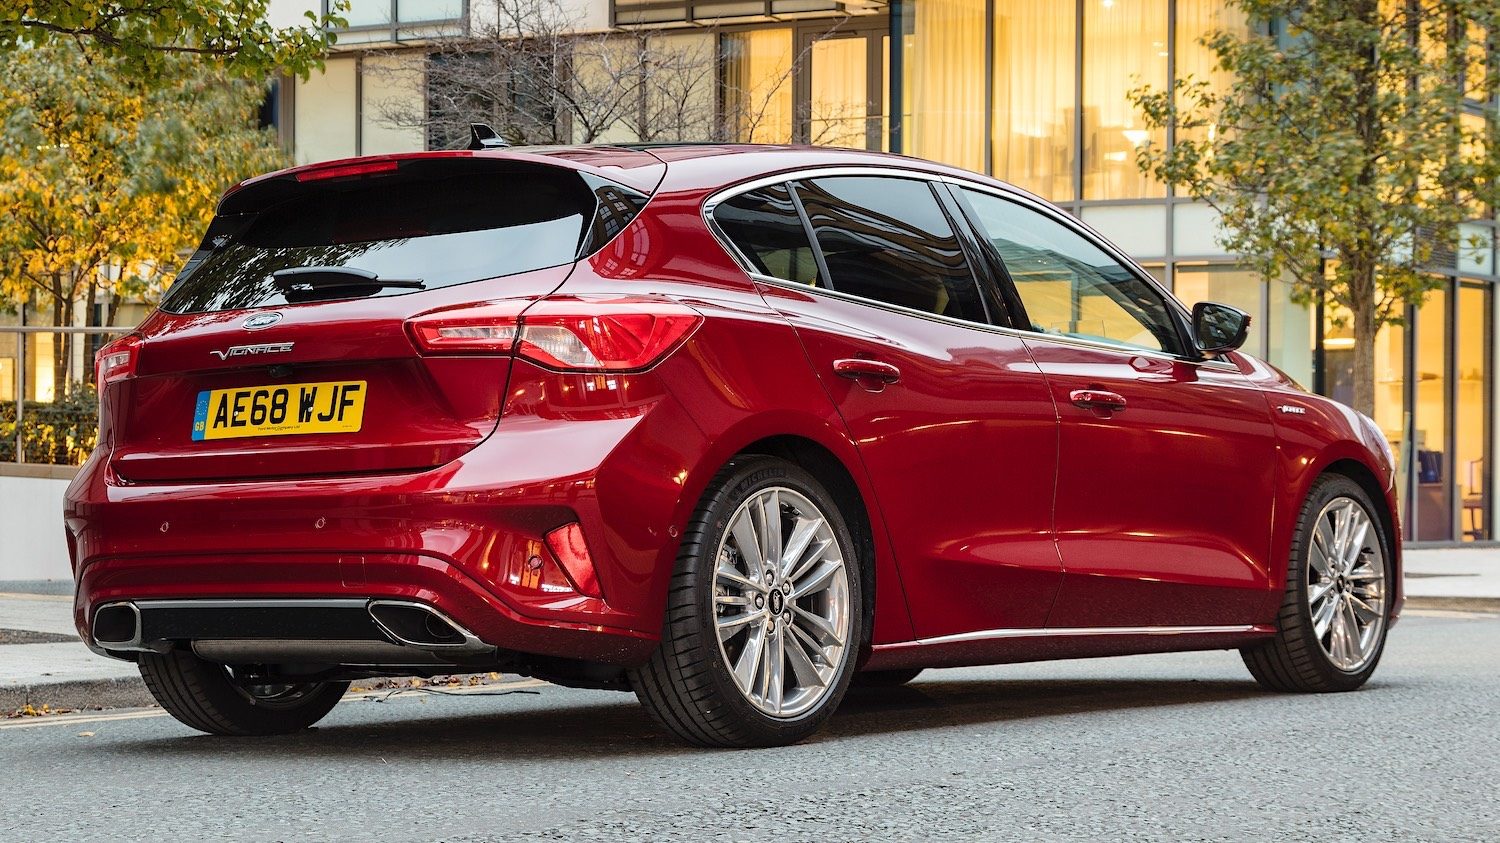 Drive Co Uk Reviewed Ford Focus Vignale Sumptuously Luxurious